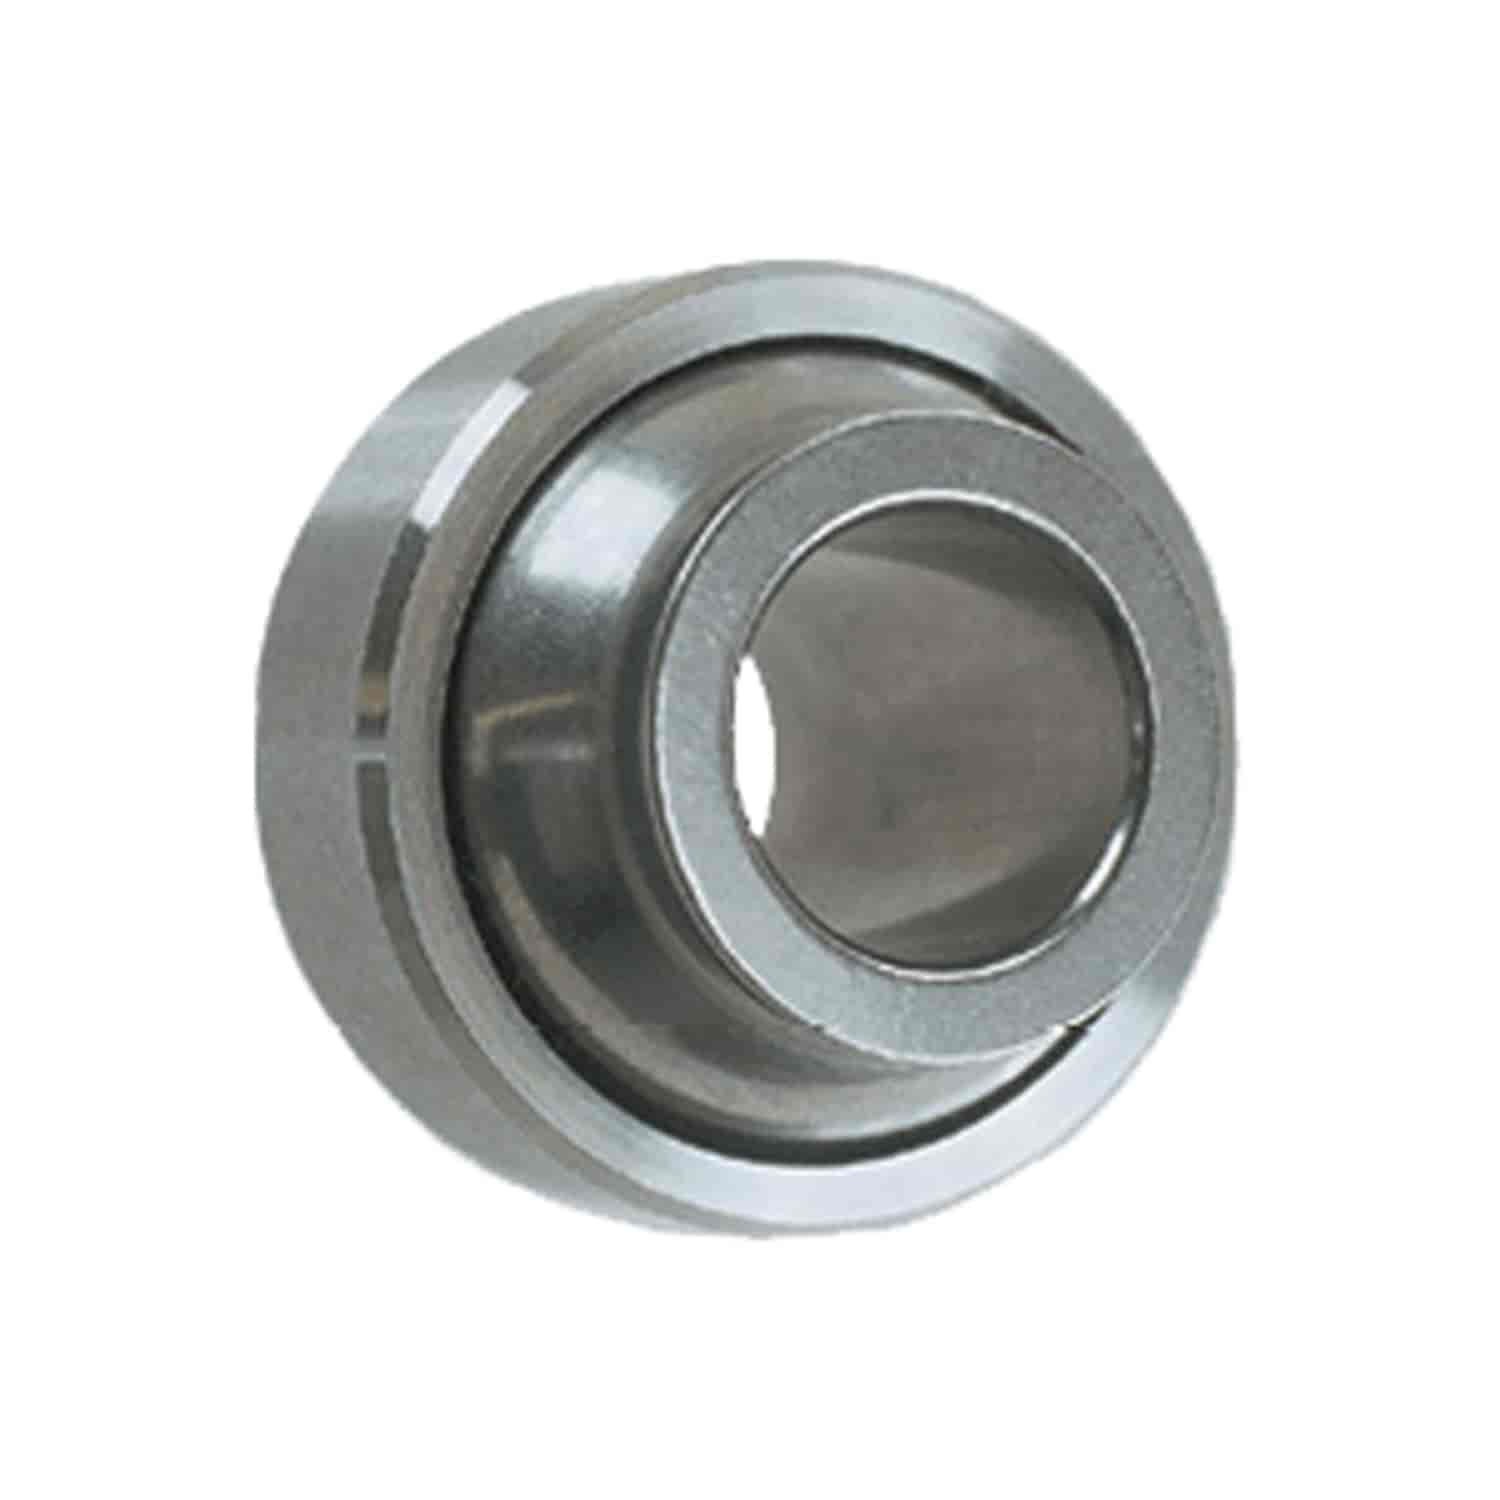 High Misalignment 440C SS Shperical Bearing Hole Size: 0.375"